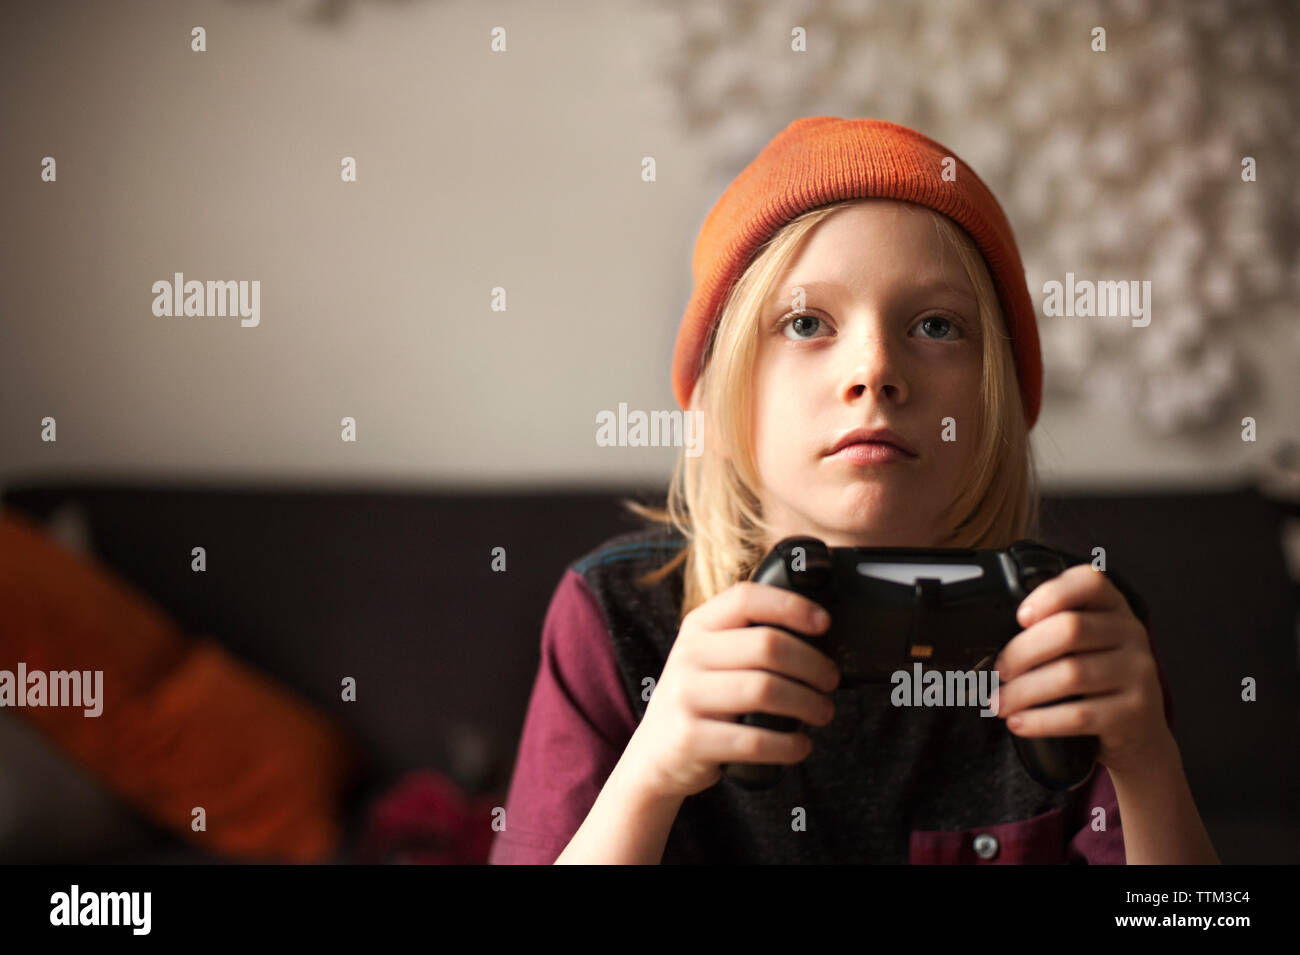 Close-up of boy playing video game at home Banque D'Images